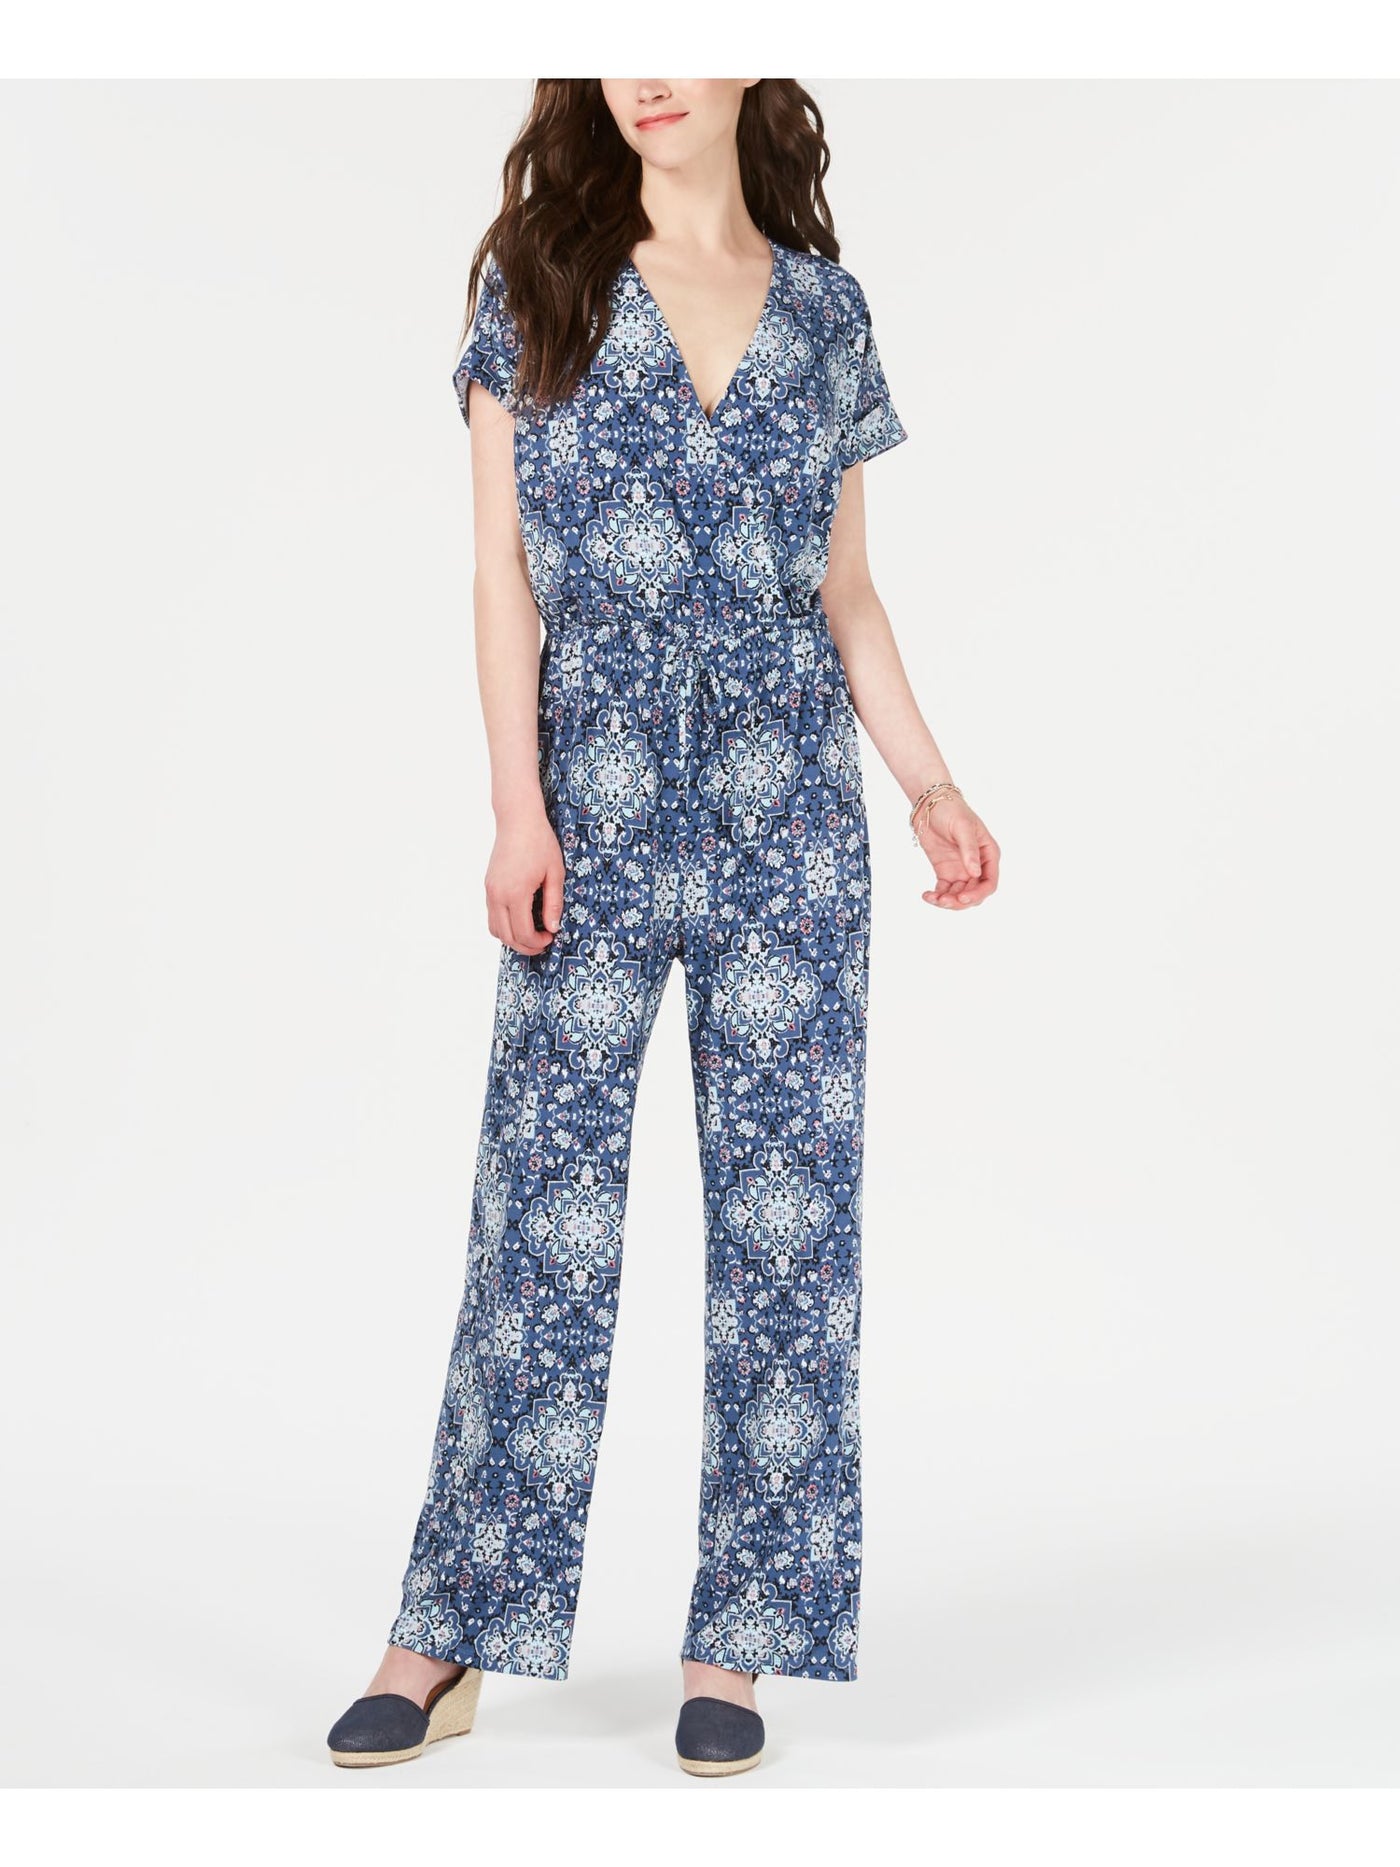 STYLE & COMPANY Womens Blue Knit Ruched Tie Waist Printed Short Sleeve V Neck Jumpsuit XL